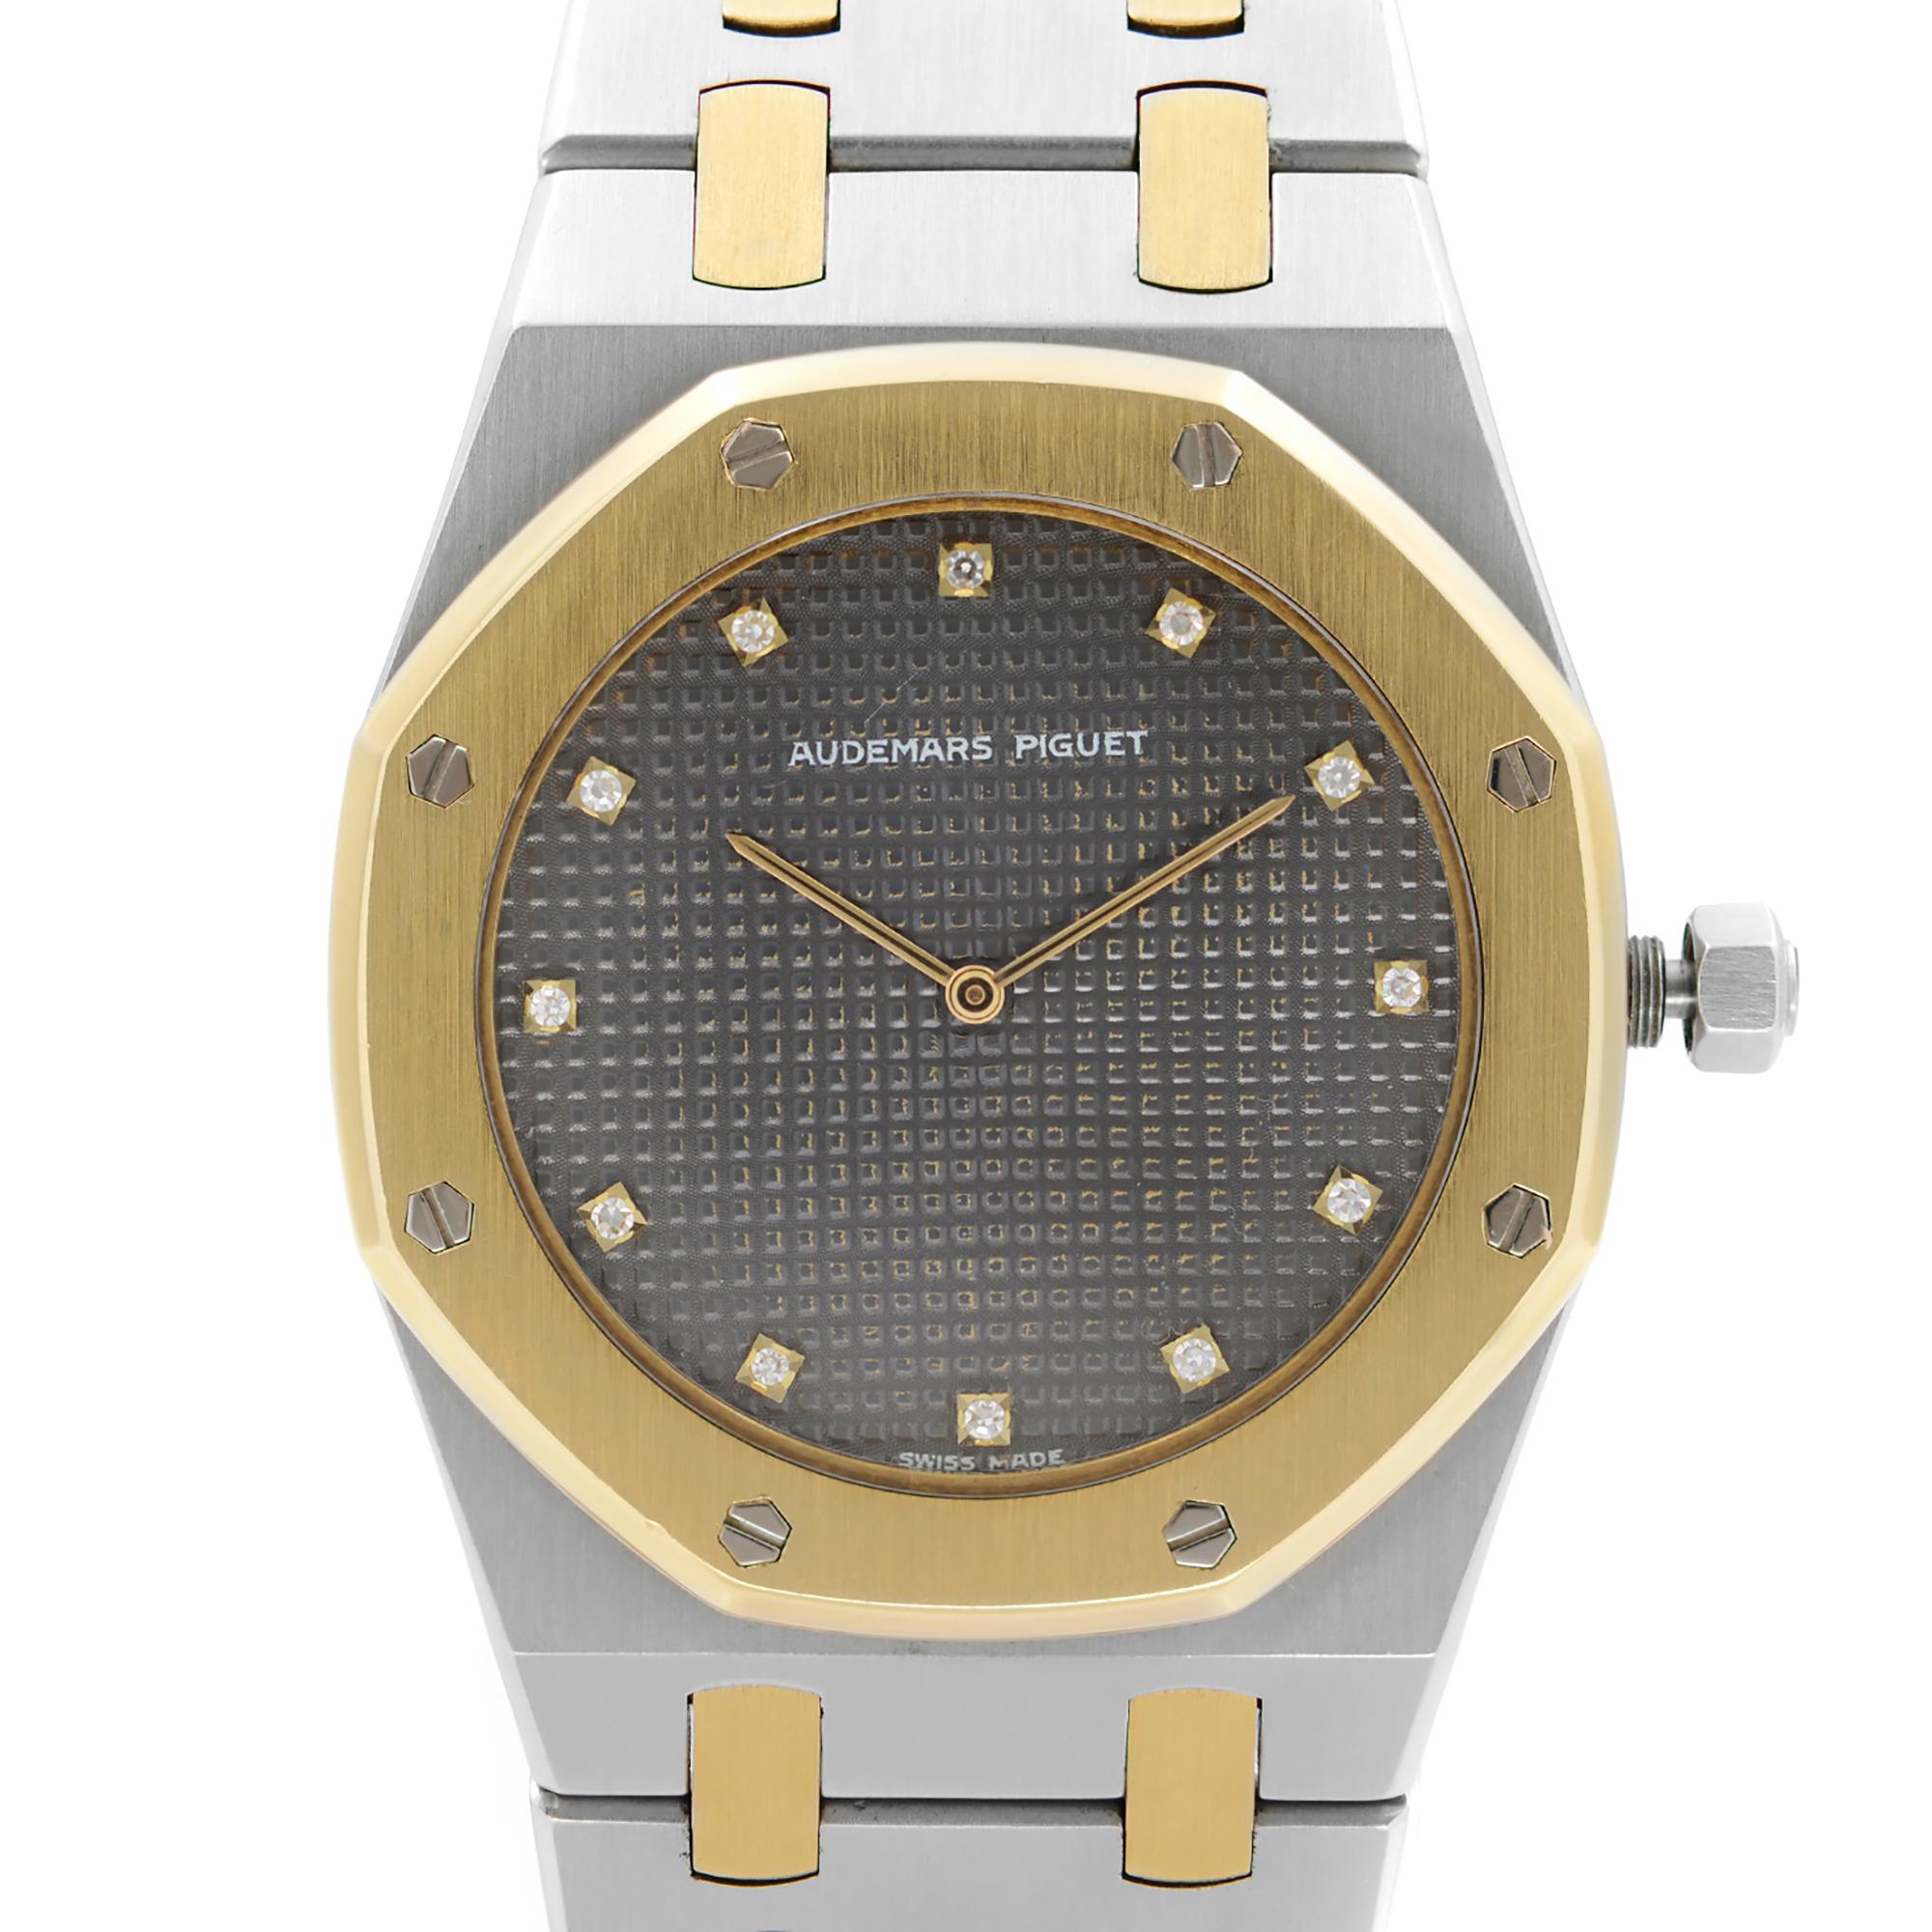 Pre-Owned Audemars Piguet Royal Oak 33mm 18K Gold Steel Diamond Gray Dial Quartz Men Watch. factory Diamond Dial. The Watch is empowered by a Quartz Movement. This Beautiful Timepiece Features: Brushed Octagon Stainless Steel and Yellow Gold Case